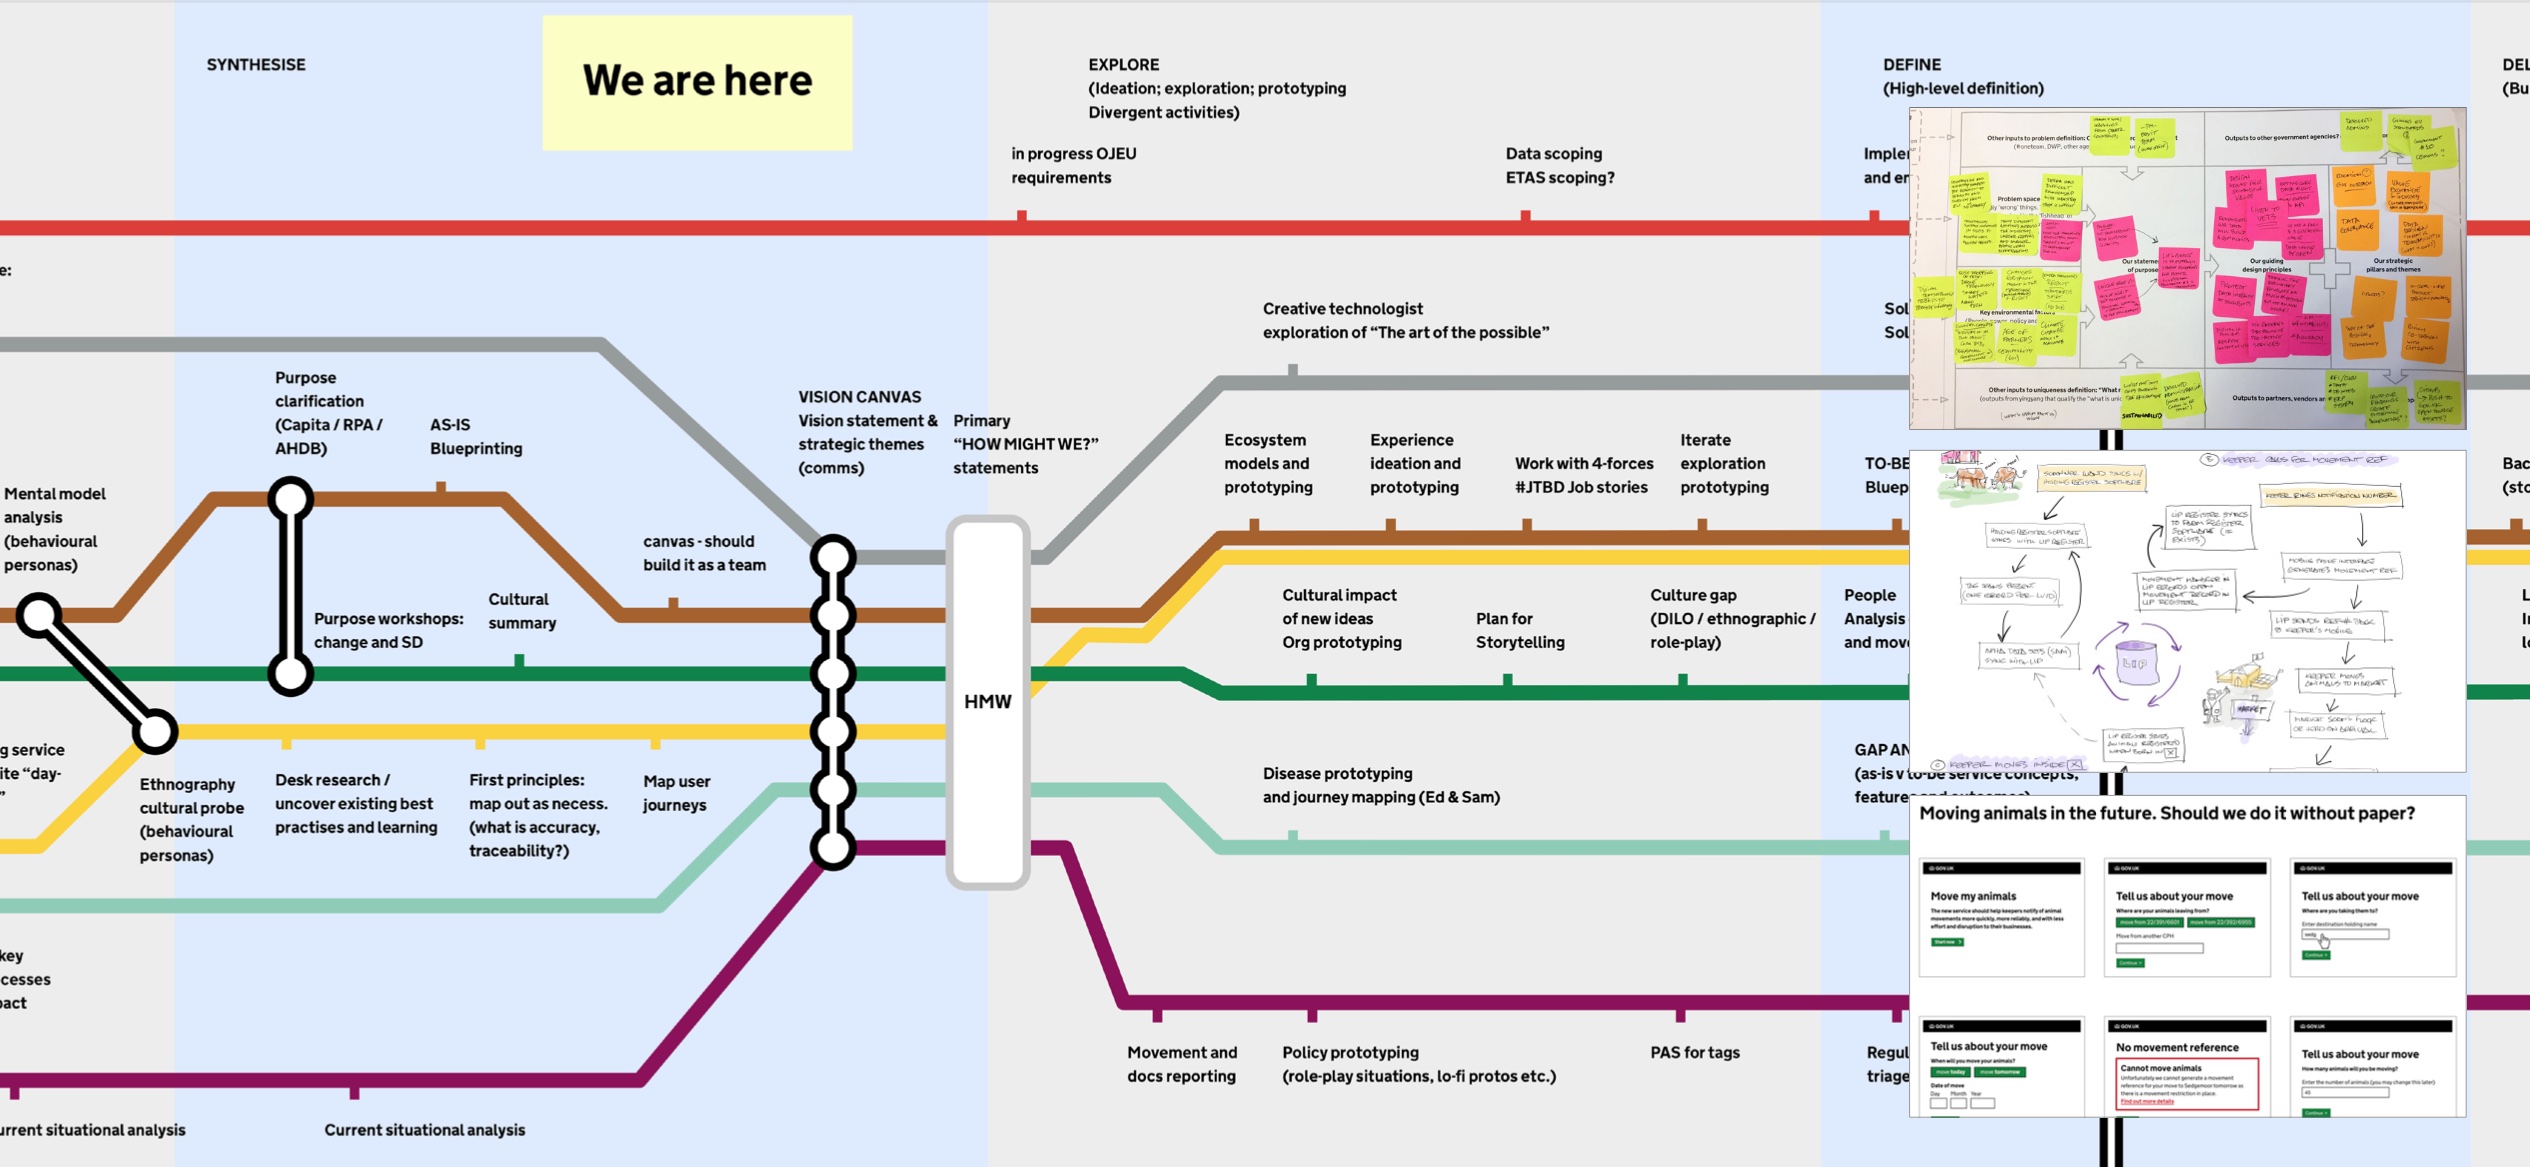 Service design process showing organisational silos expressed as tube lines.